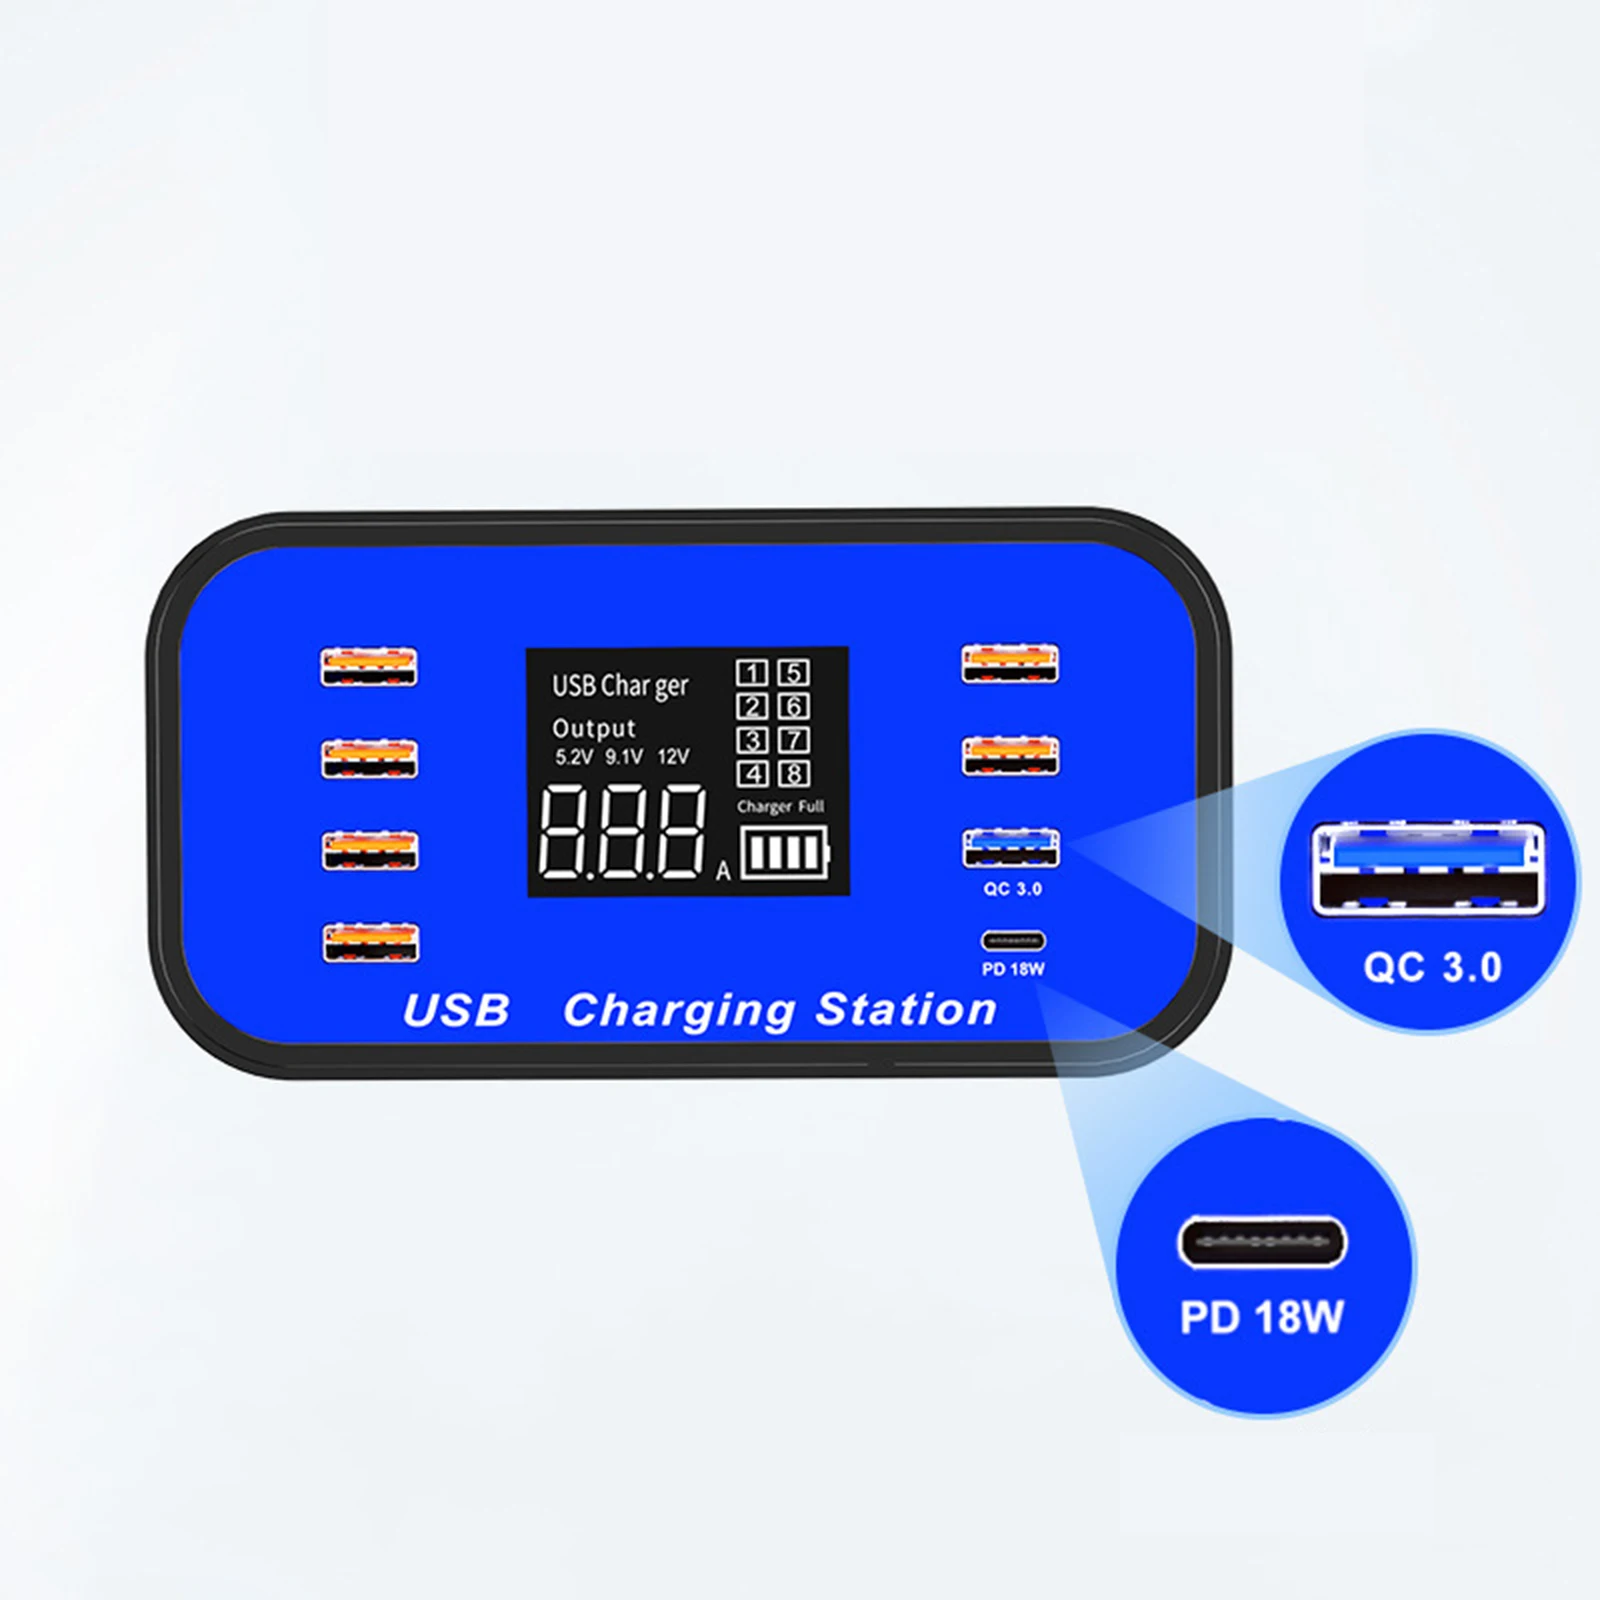 Multi Smart USB Charger 8-Port Desktop Hub Charging Station USB PD-18W QC 3.0 With LCD Display for iOS Android Phone Tablet